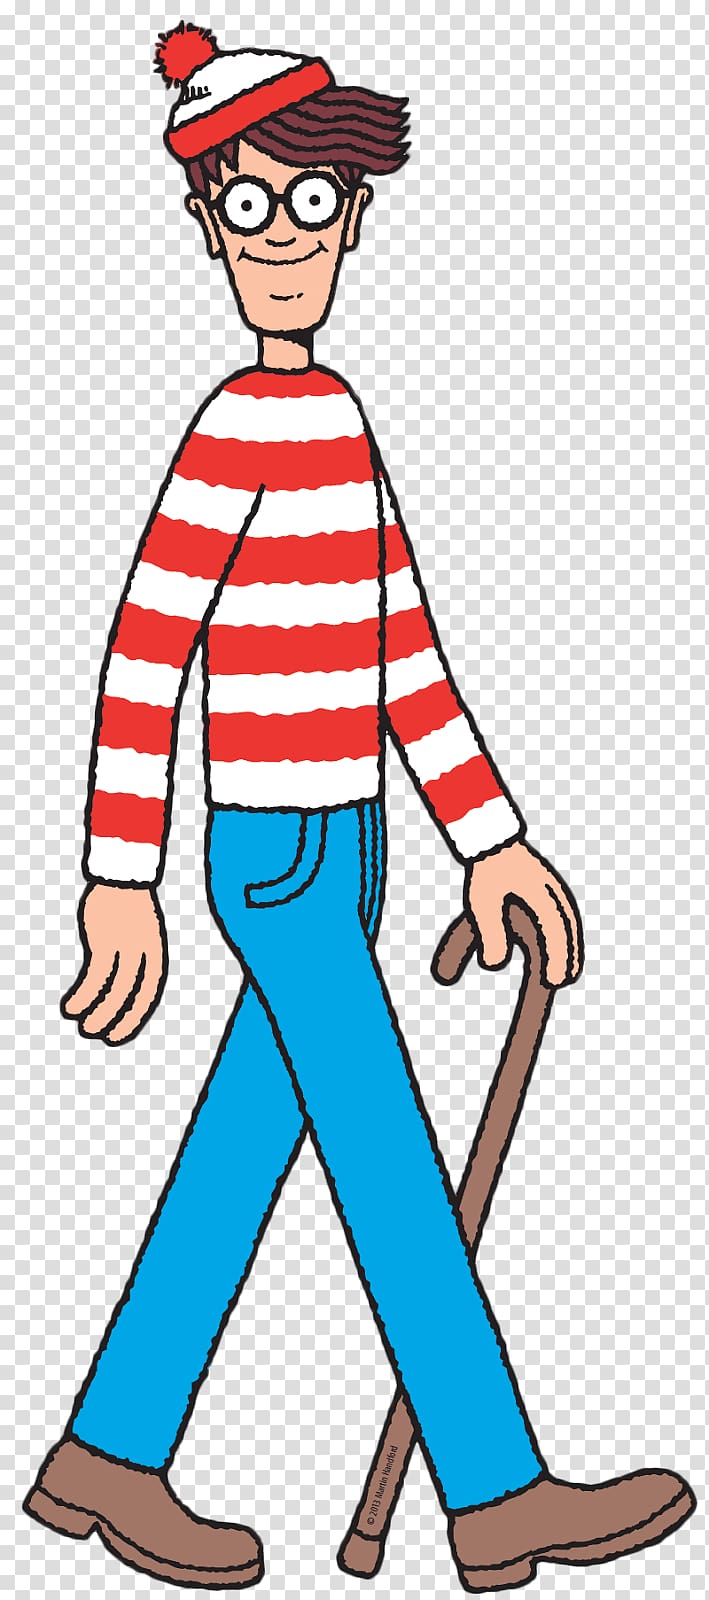 of man holding cane, Where\'s Wally? Character The Waldo Waldo 5K Children\'s literature Book, where to? transparent background PNG clipart